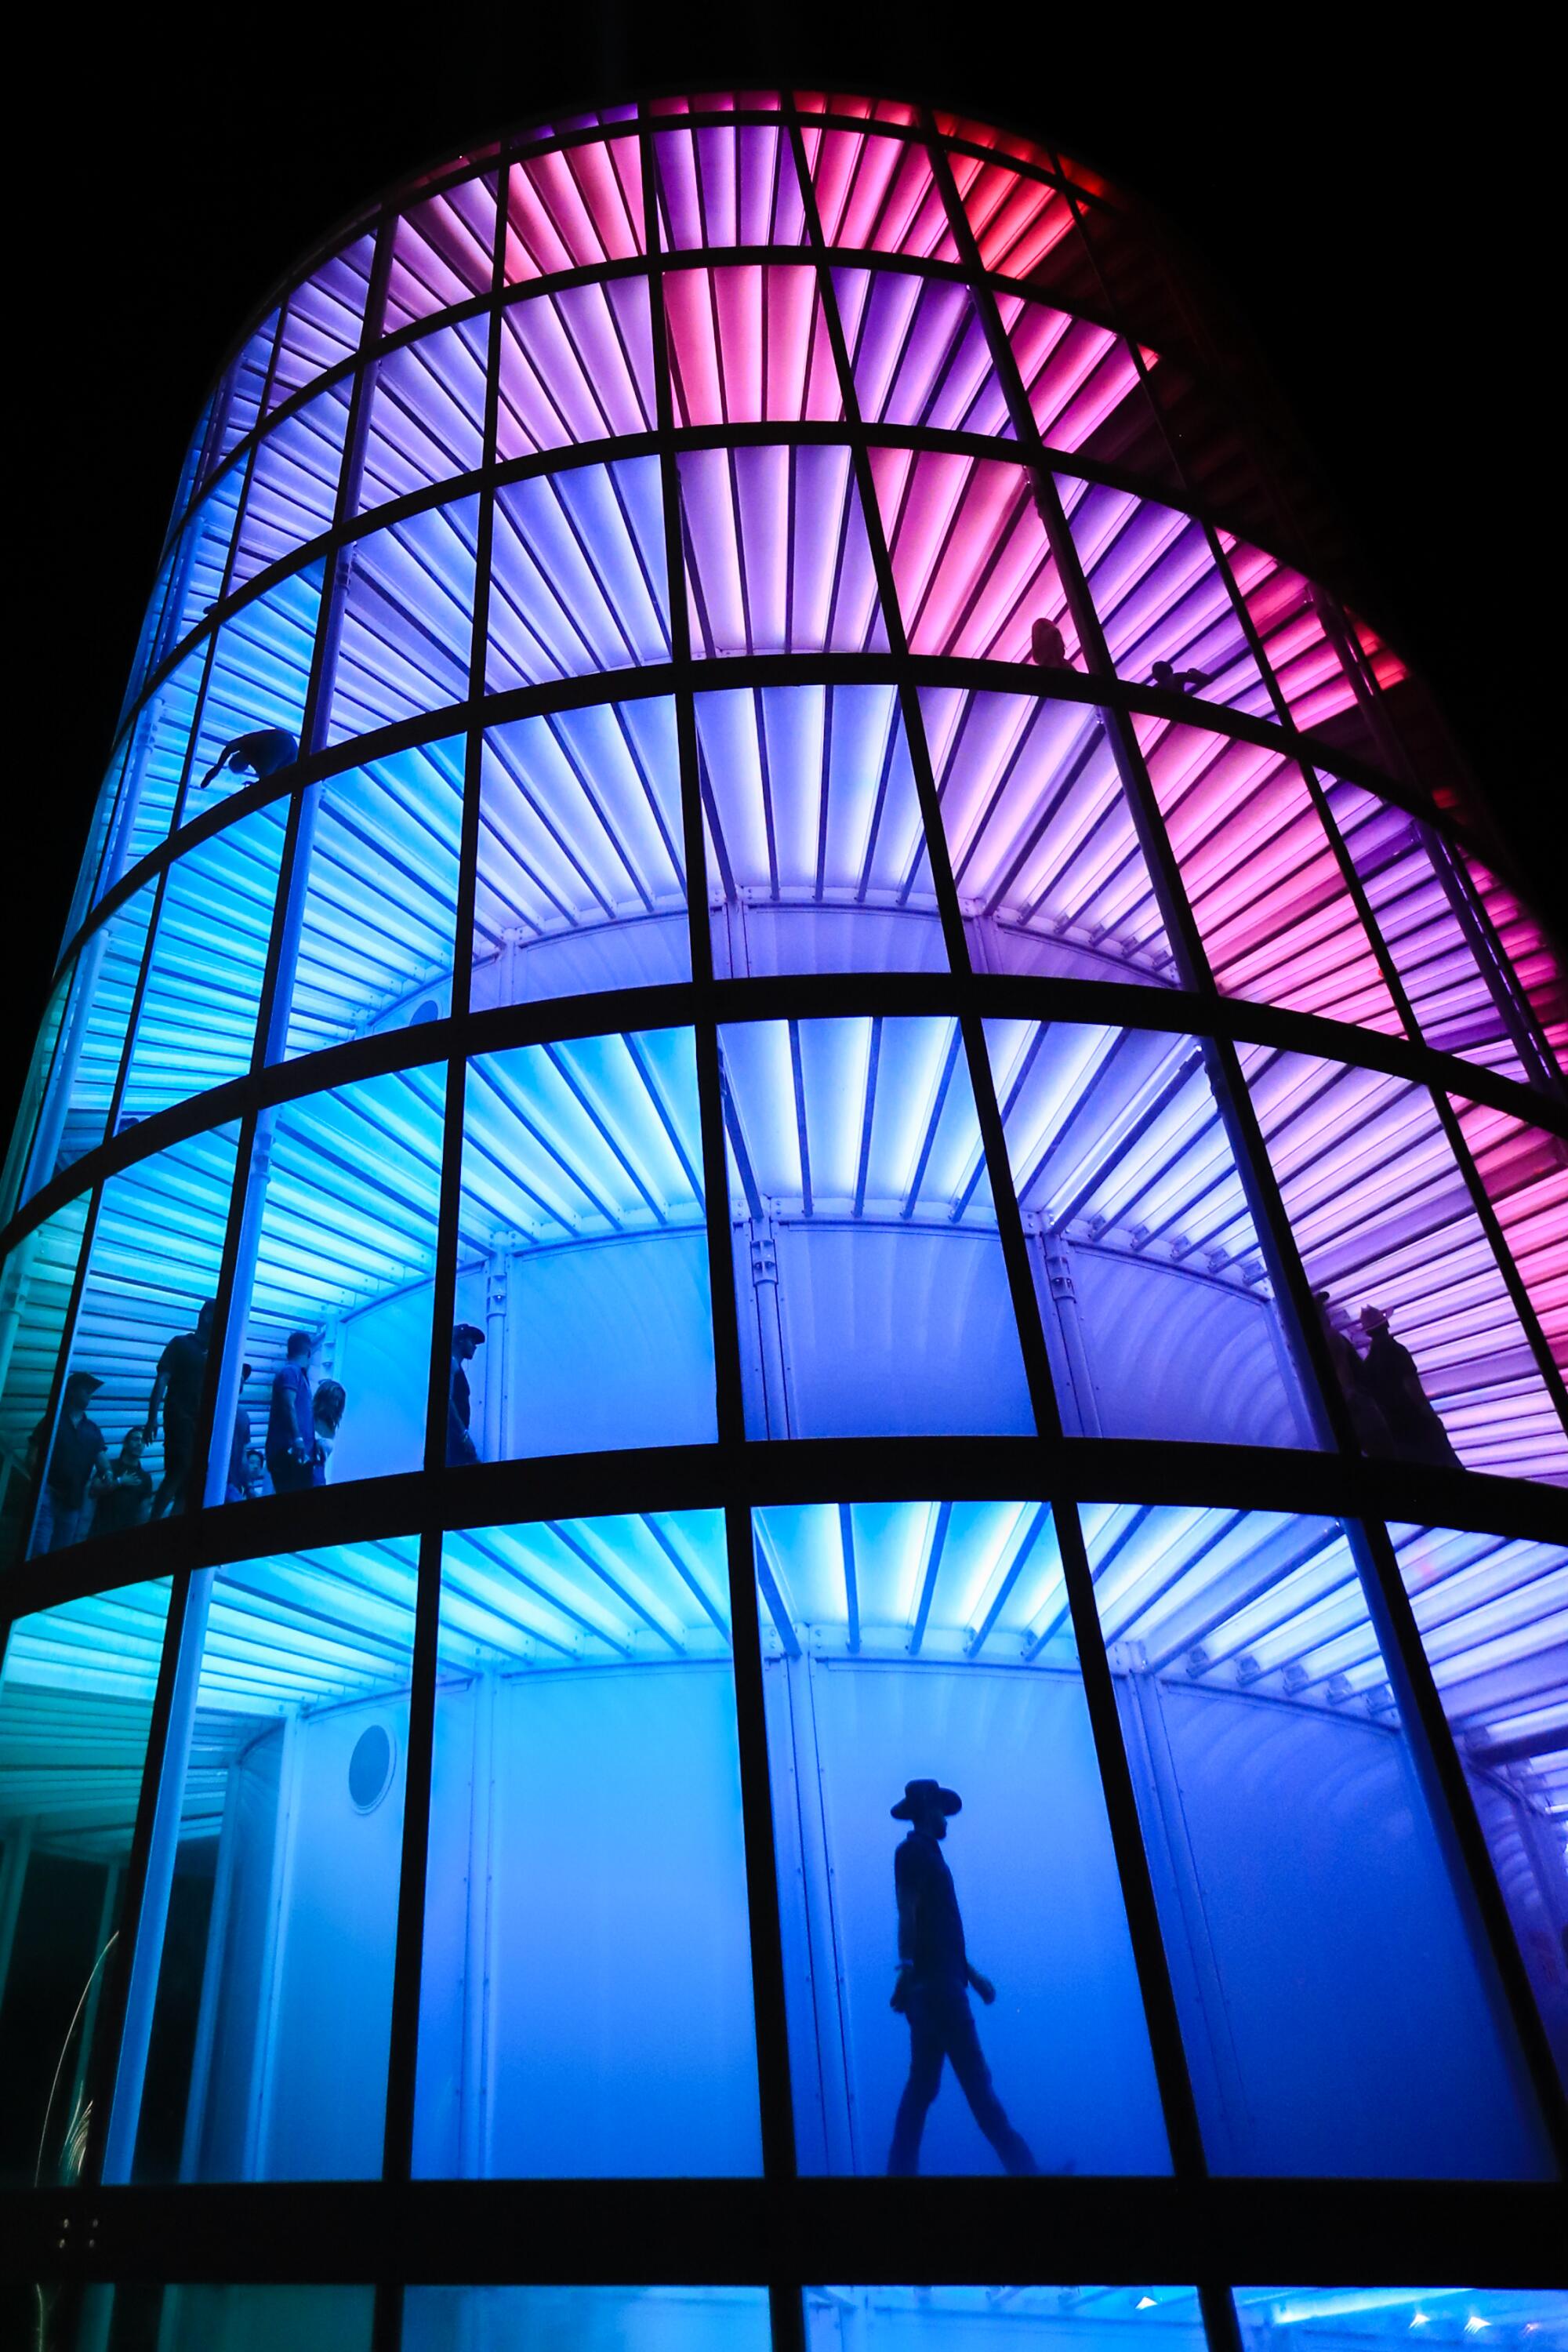 A festival goer is silhouetted while walking at night through a blue, purple and pink lighted tower.